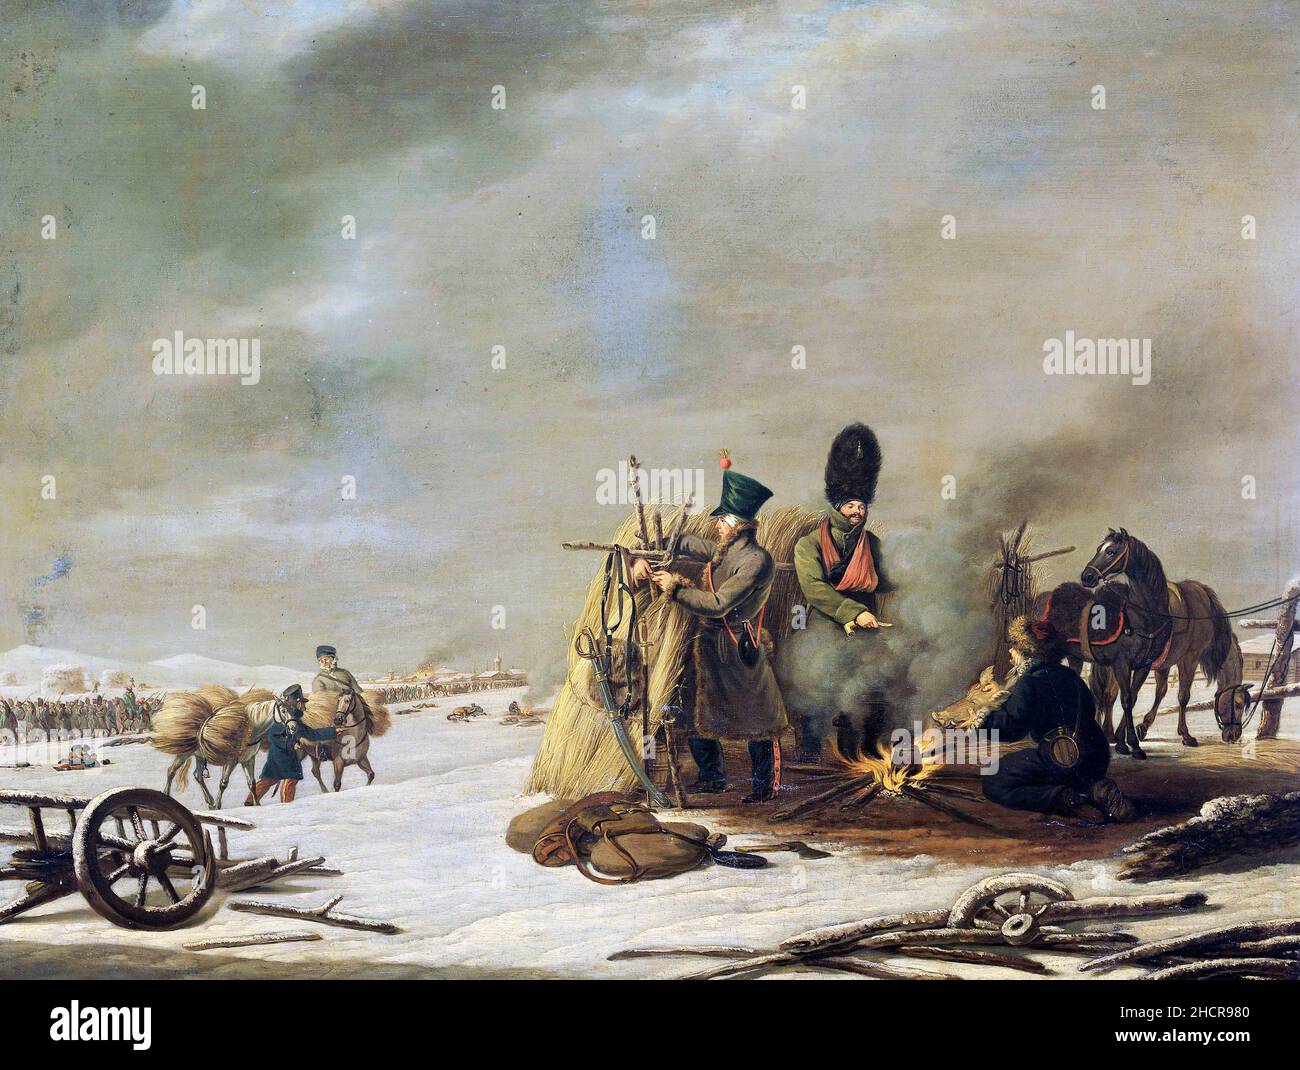 Bivouac at Molodechno, 3-4 December 1812: an episode from Napoleon's Retreat from Russia by Johannes Hari, oil on panel, c. 1812-20 Stock Photo